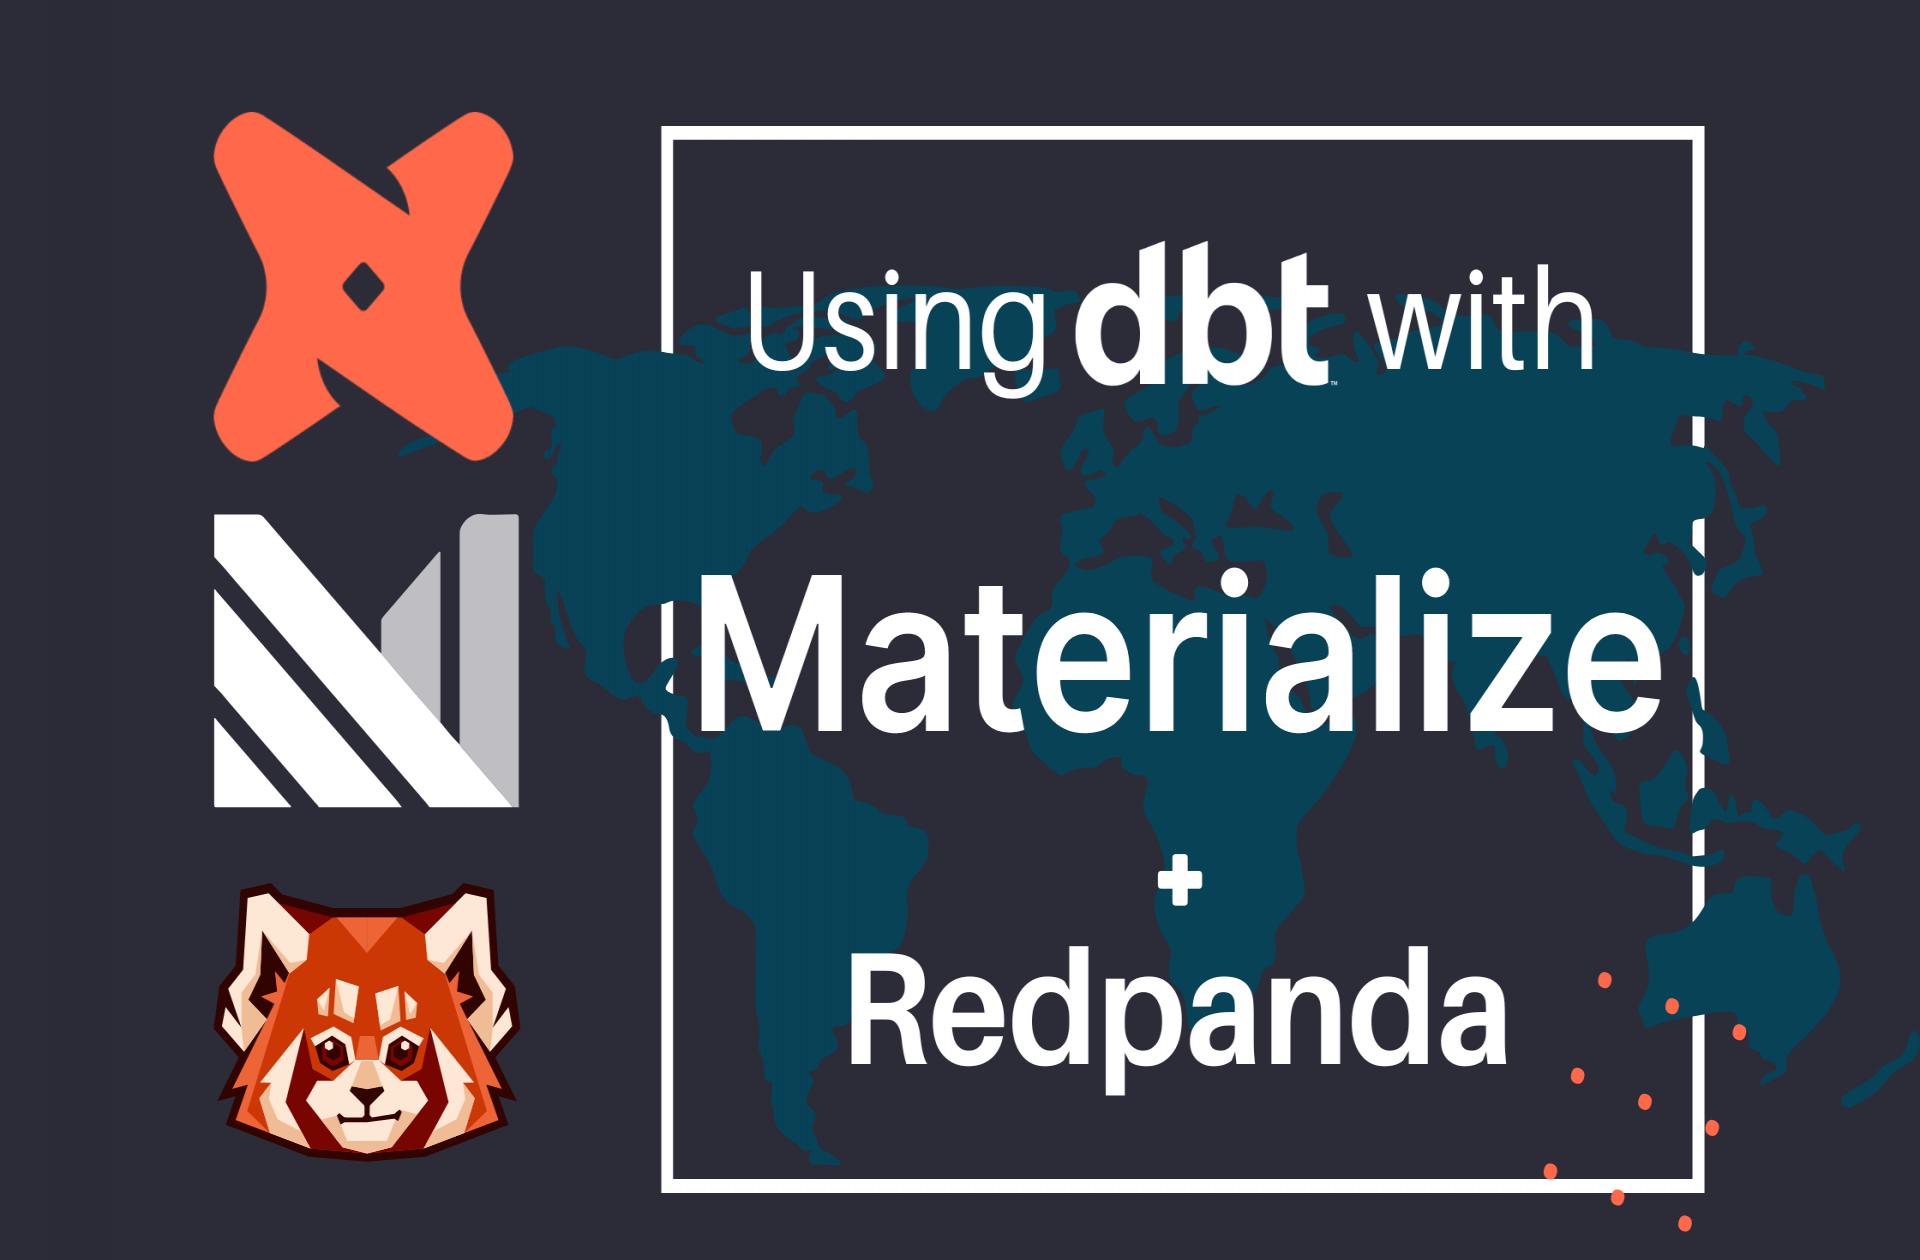 How to use dbt with Materialize and Redpanda